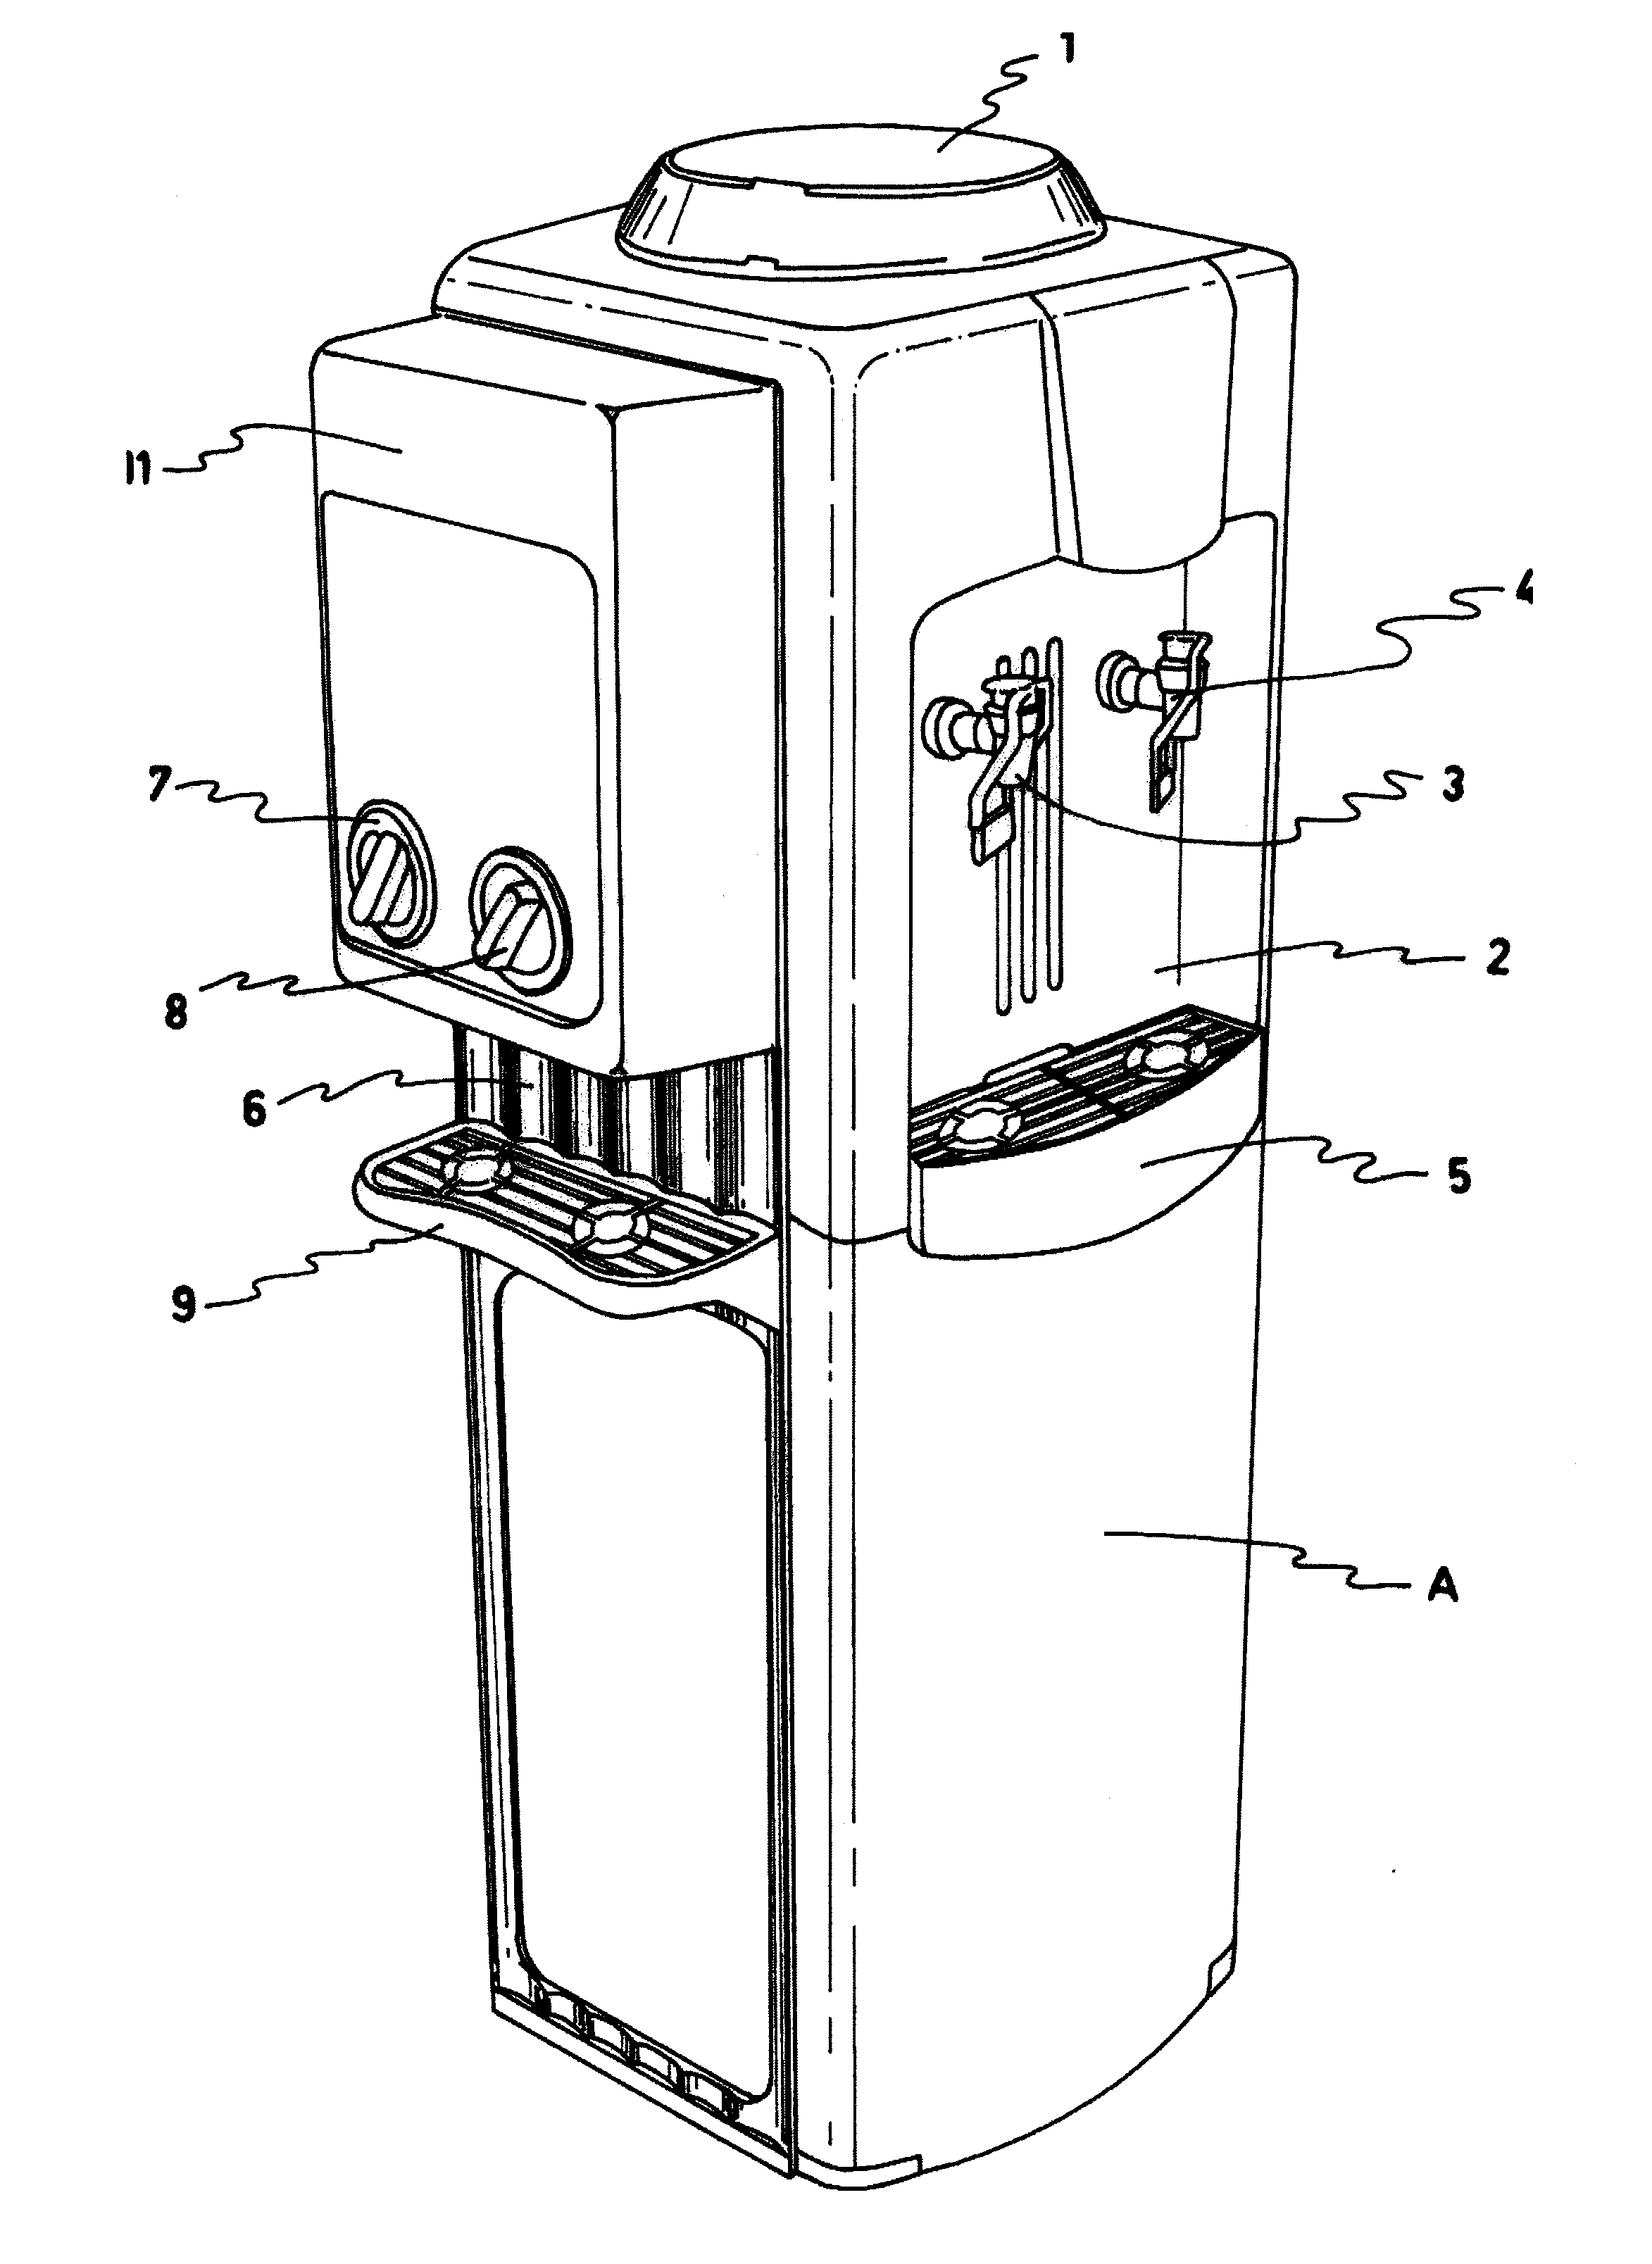 Dosing Dispensor for Powdered or Granular Material to be Affixed to Water Dispensors